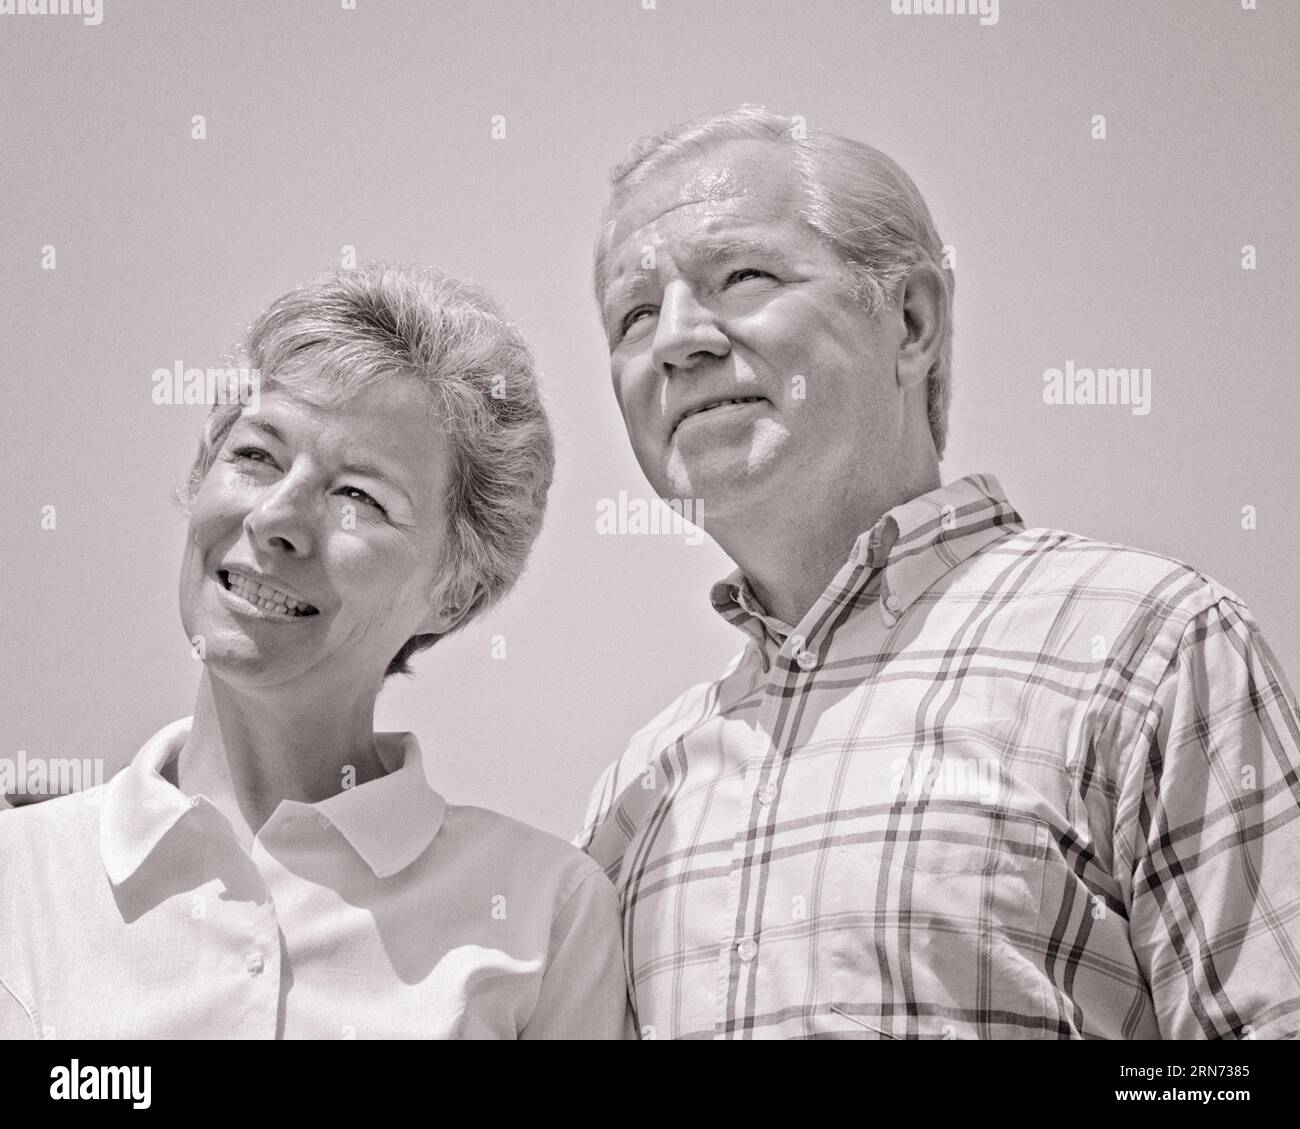 1960s PORTRAIT OF SMILING RETIRED COUPLE MAN AND WOMAN - p7576 HAR001 HARS COPY SPACE FRIENDSHIP LADIES PERSONS MALES RETIREMENT SENIOR MAN SENIOR ADULT B&W PARTNER SENIOR WOMAN RETIREE HAPPINESS OLD AGE OLDSTERS HEAD AND SHOULDERS CHEERFUL OLDSTER AND LOW ANGLE SMILES ELDERS JOYFUL SUPPORT TOGETHERNESS WIVES BLACK AND WHITE CAUCASIAN ETHNICITY HAR001 OLD FASHIONED Stock Photo